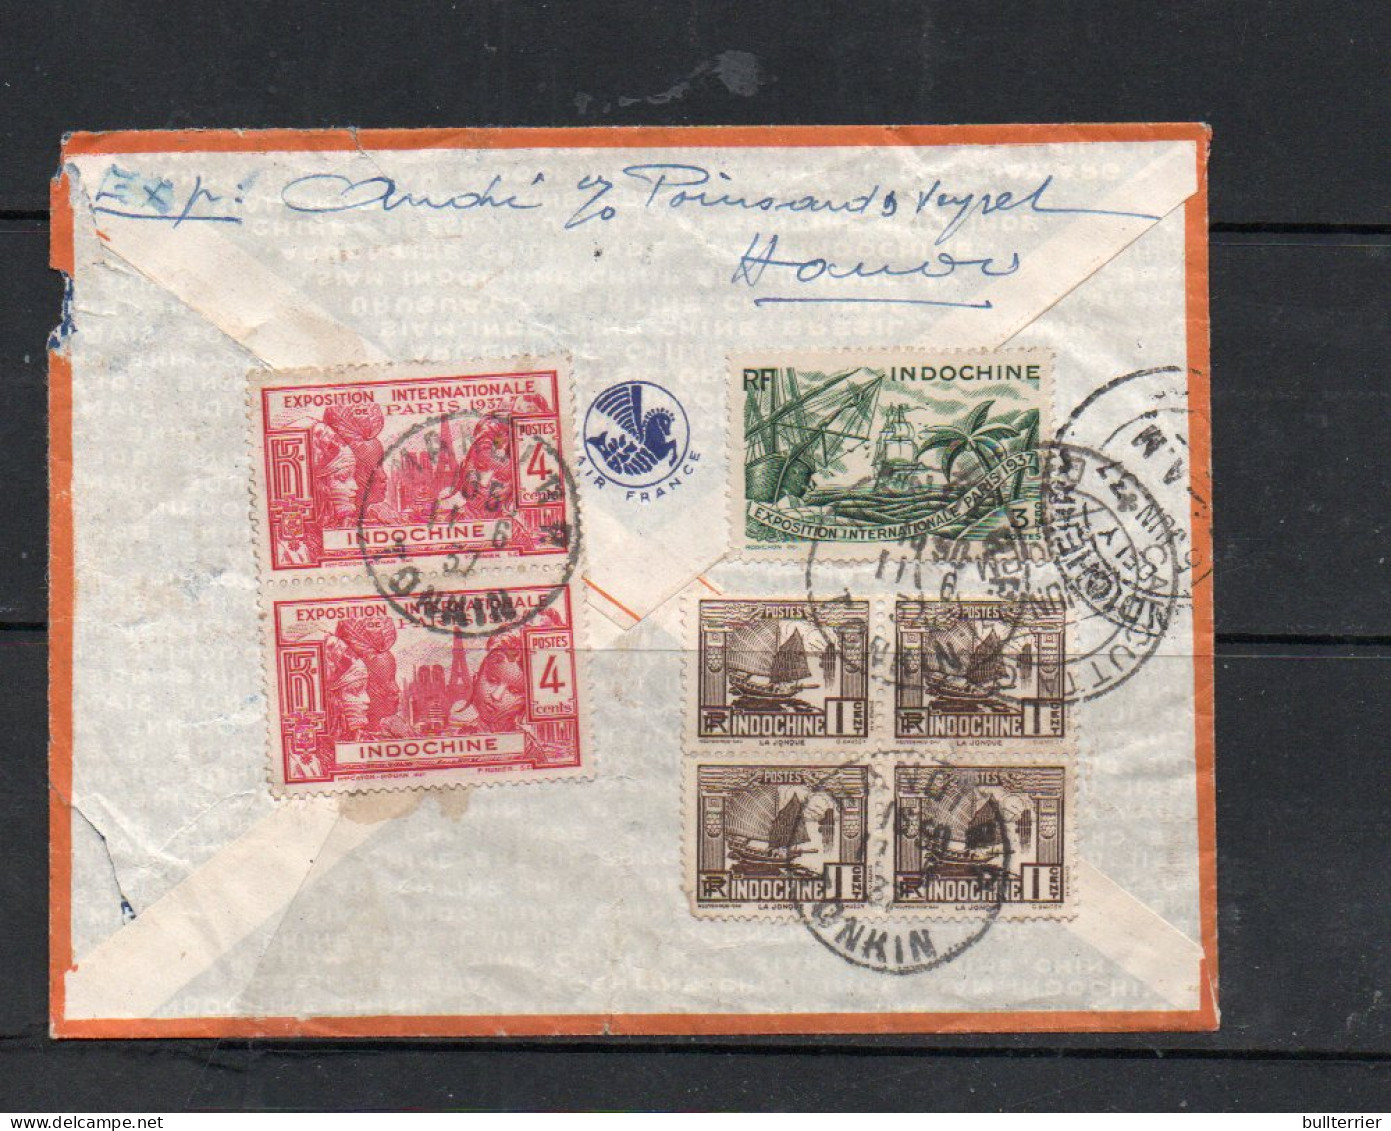 INDOCHINA - 1937 - AIRMAIL COVER HANOI TO PONDICHERRY FRENCH INDIA WITH BACKSTAMPS - Airmail